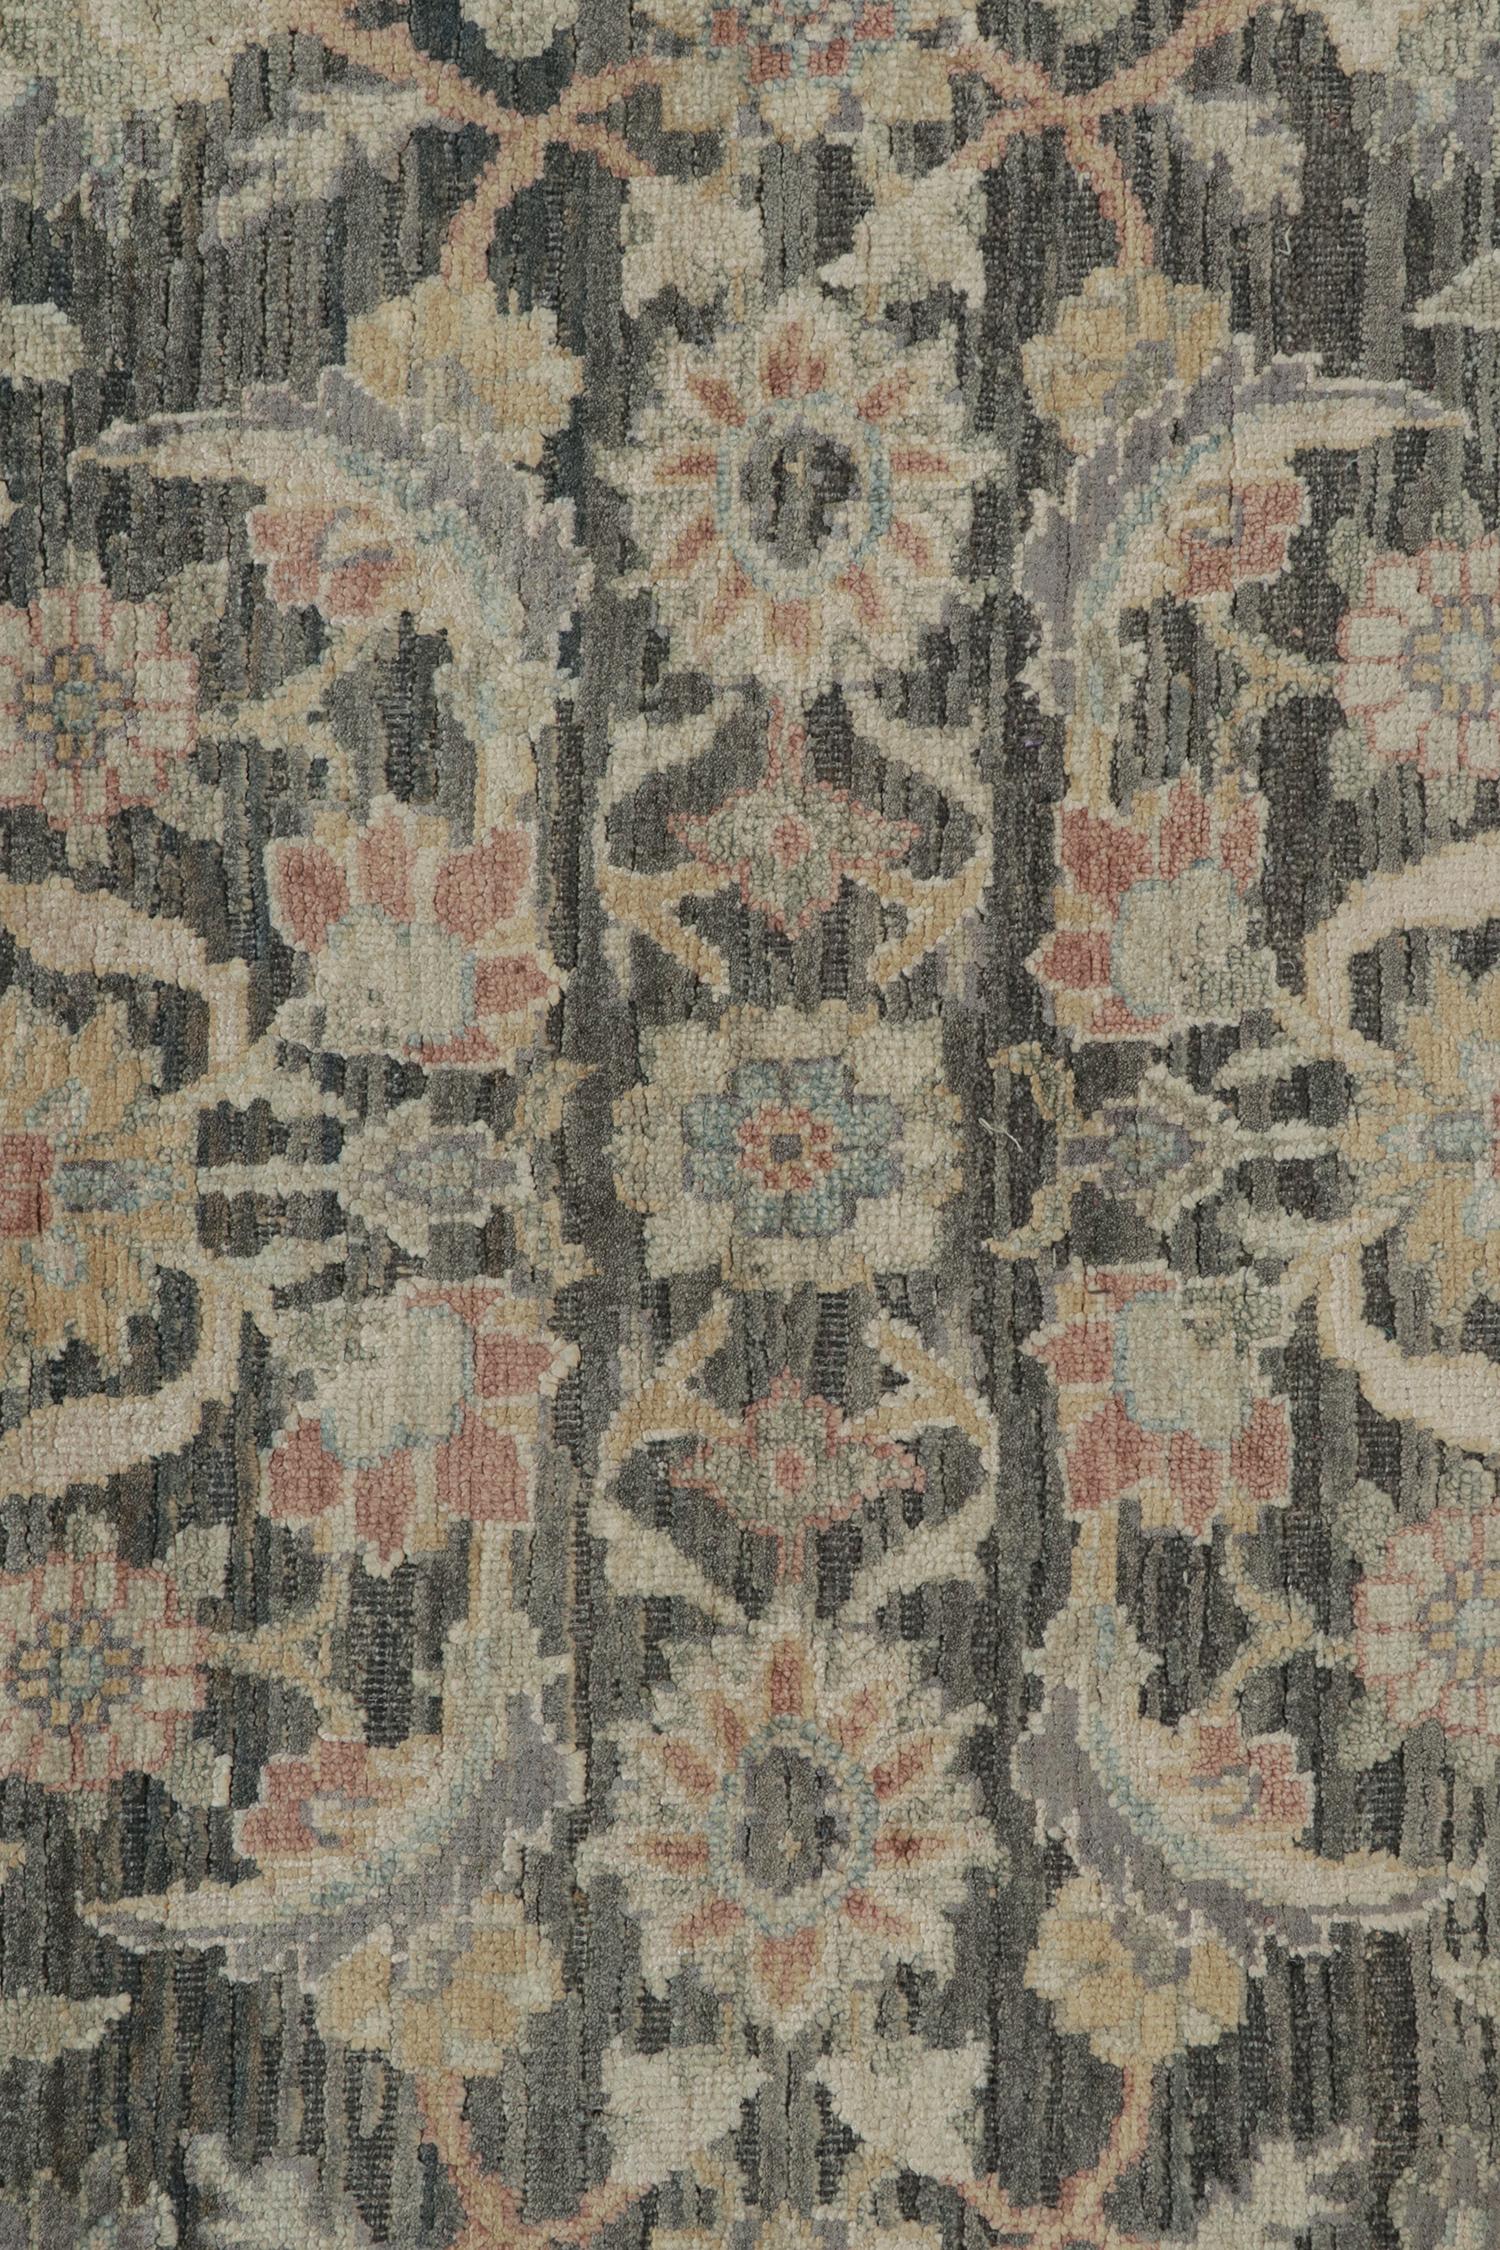 Contemporary Rug & Kilim’s Herati Style Rug with Gray, Blue and Beige-Brown Floral Patterns For Sale